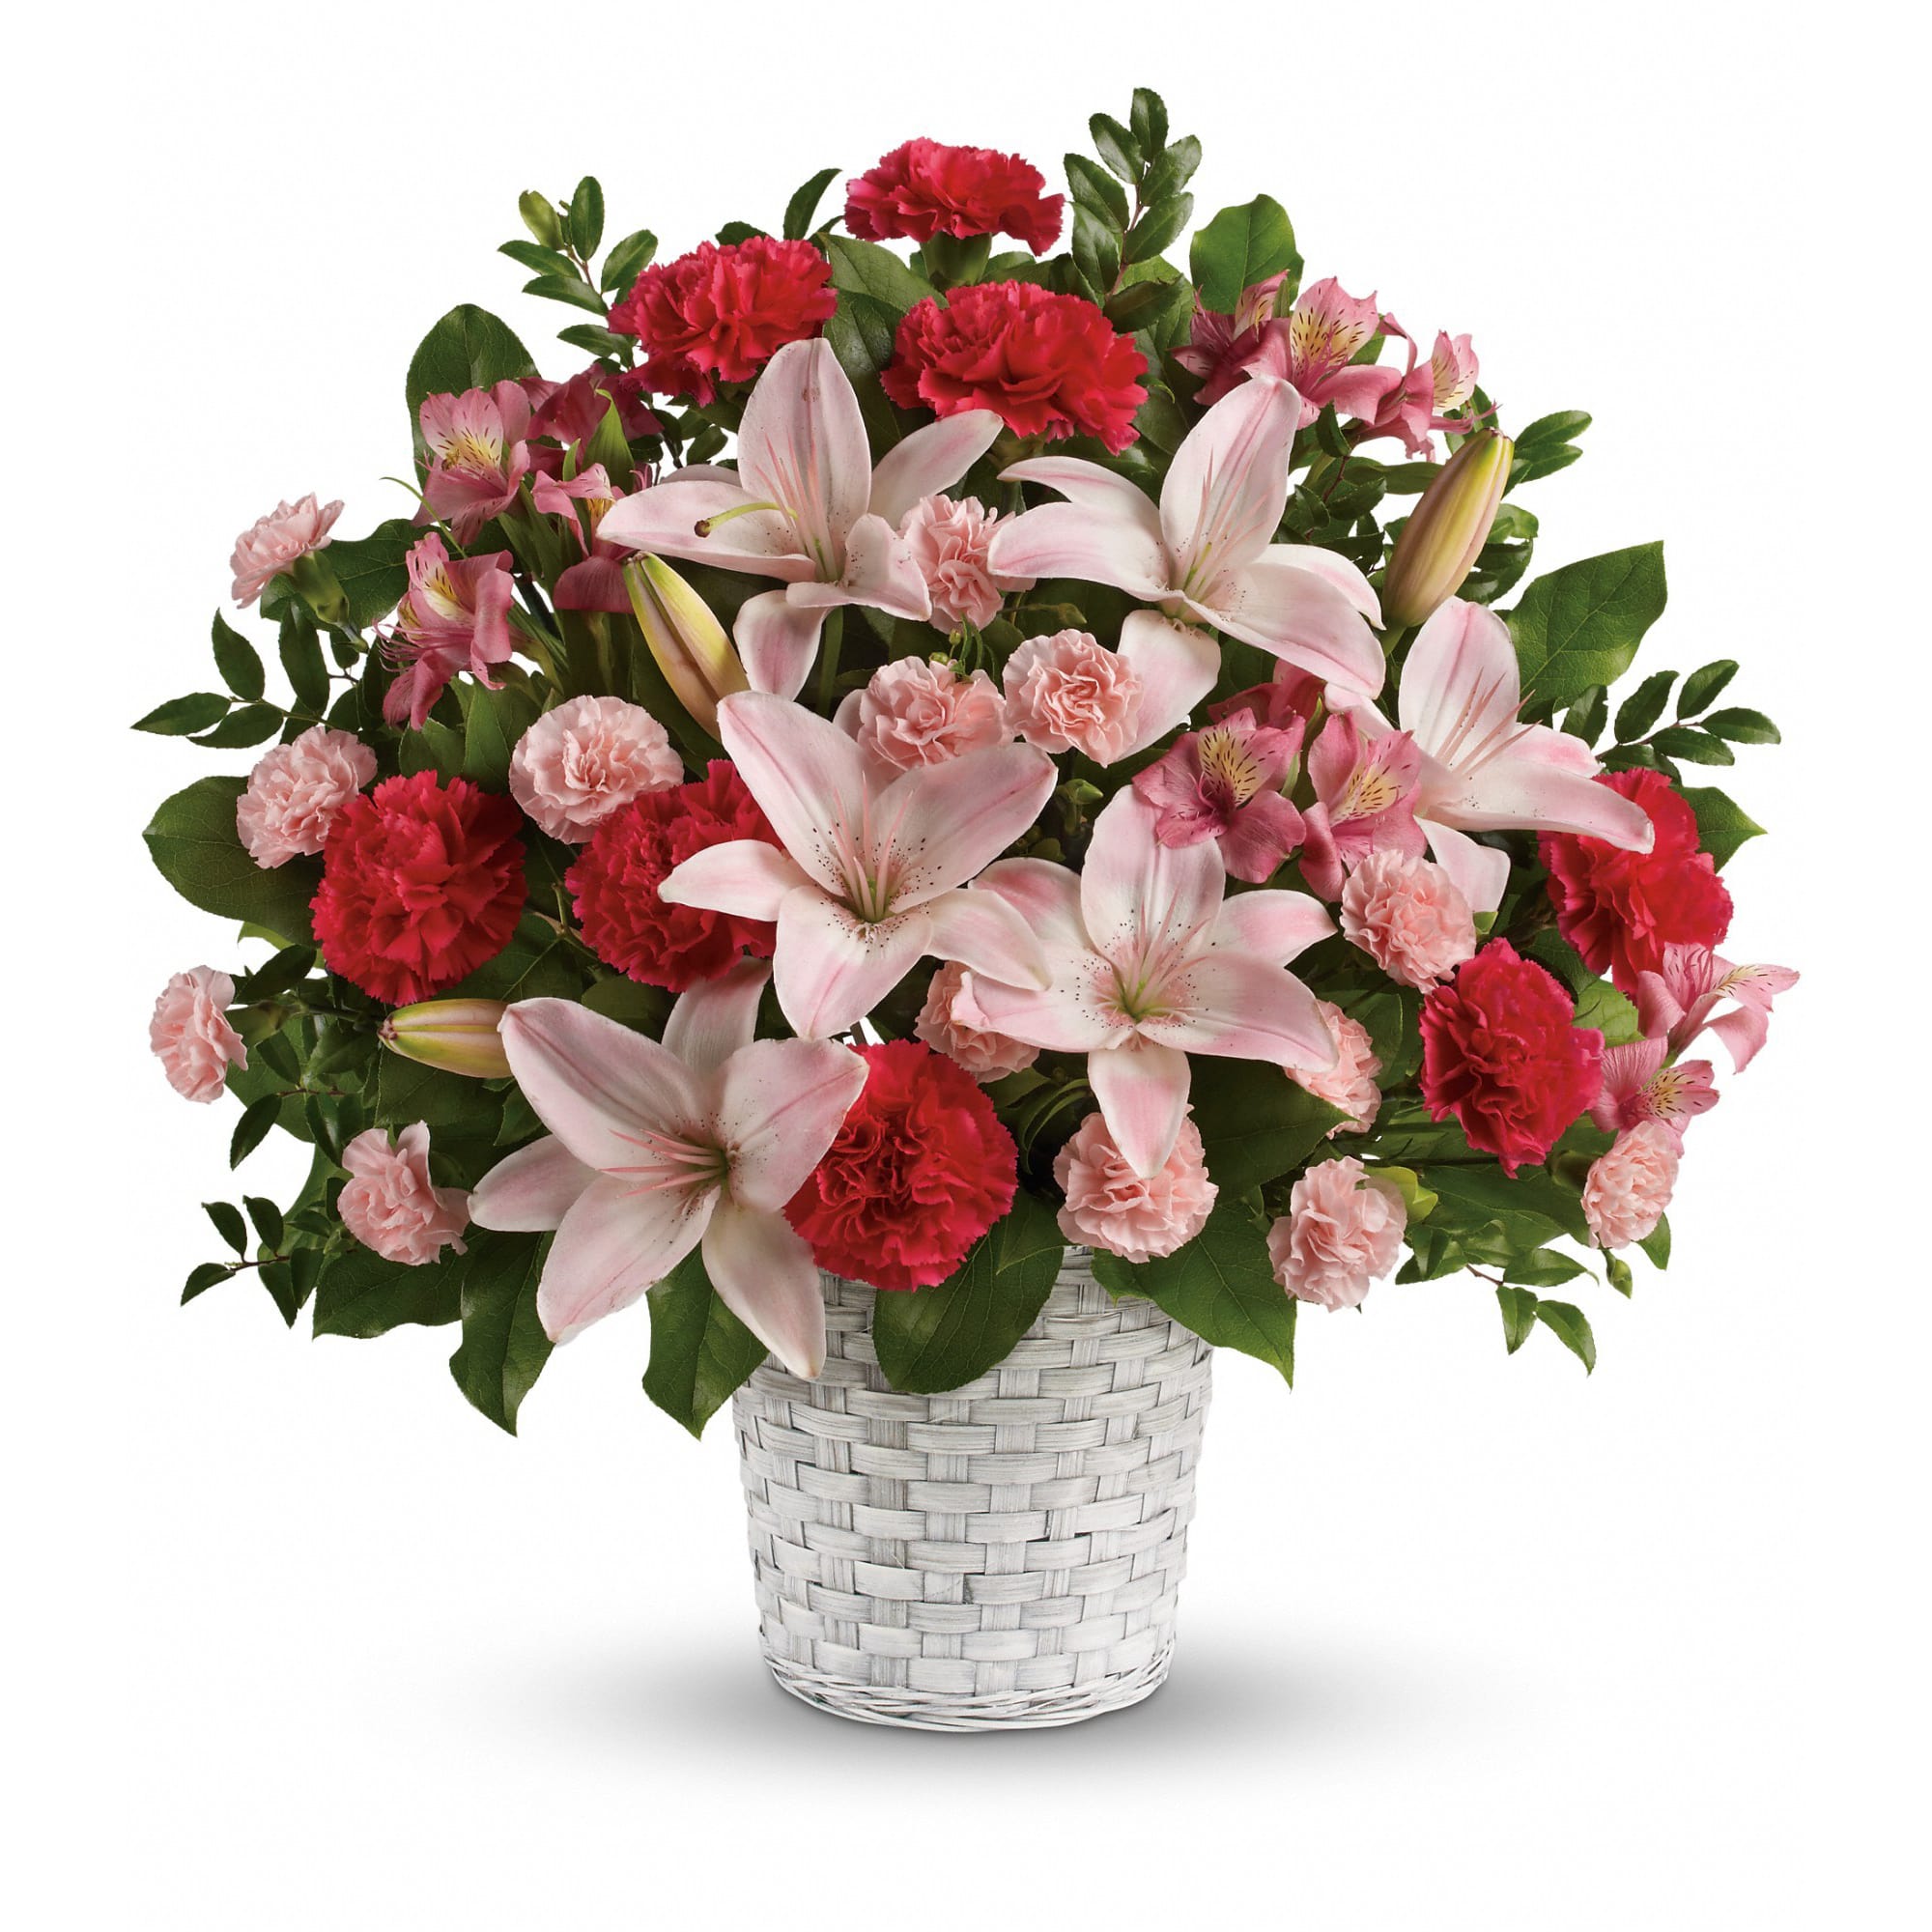 Sweet Sincerity by Teleflora - Convey your sympathy tastefully with this lovely gift of pink floral favorites in a snowy white basket. The family will be deeply touched by your thoughtfulness.  